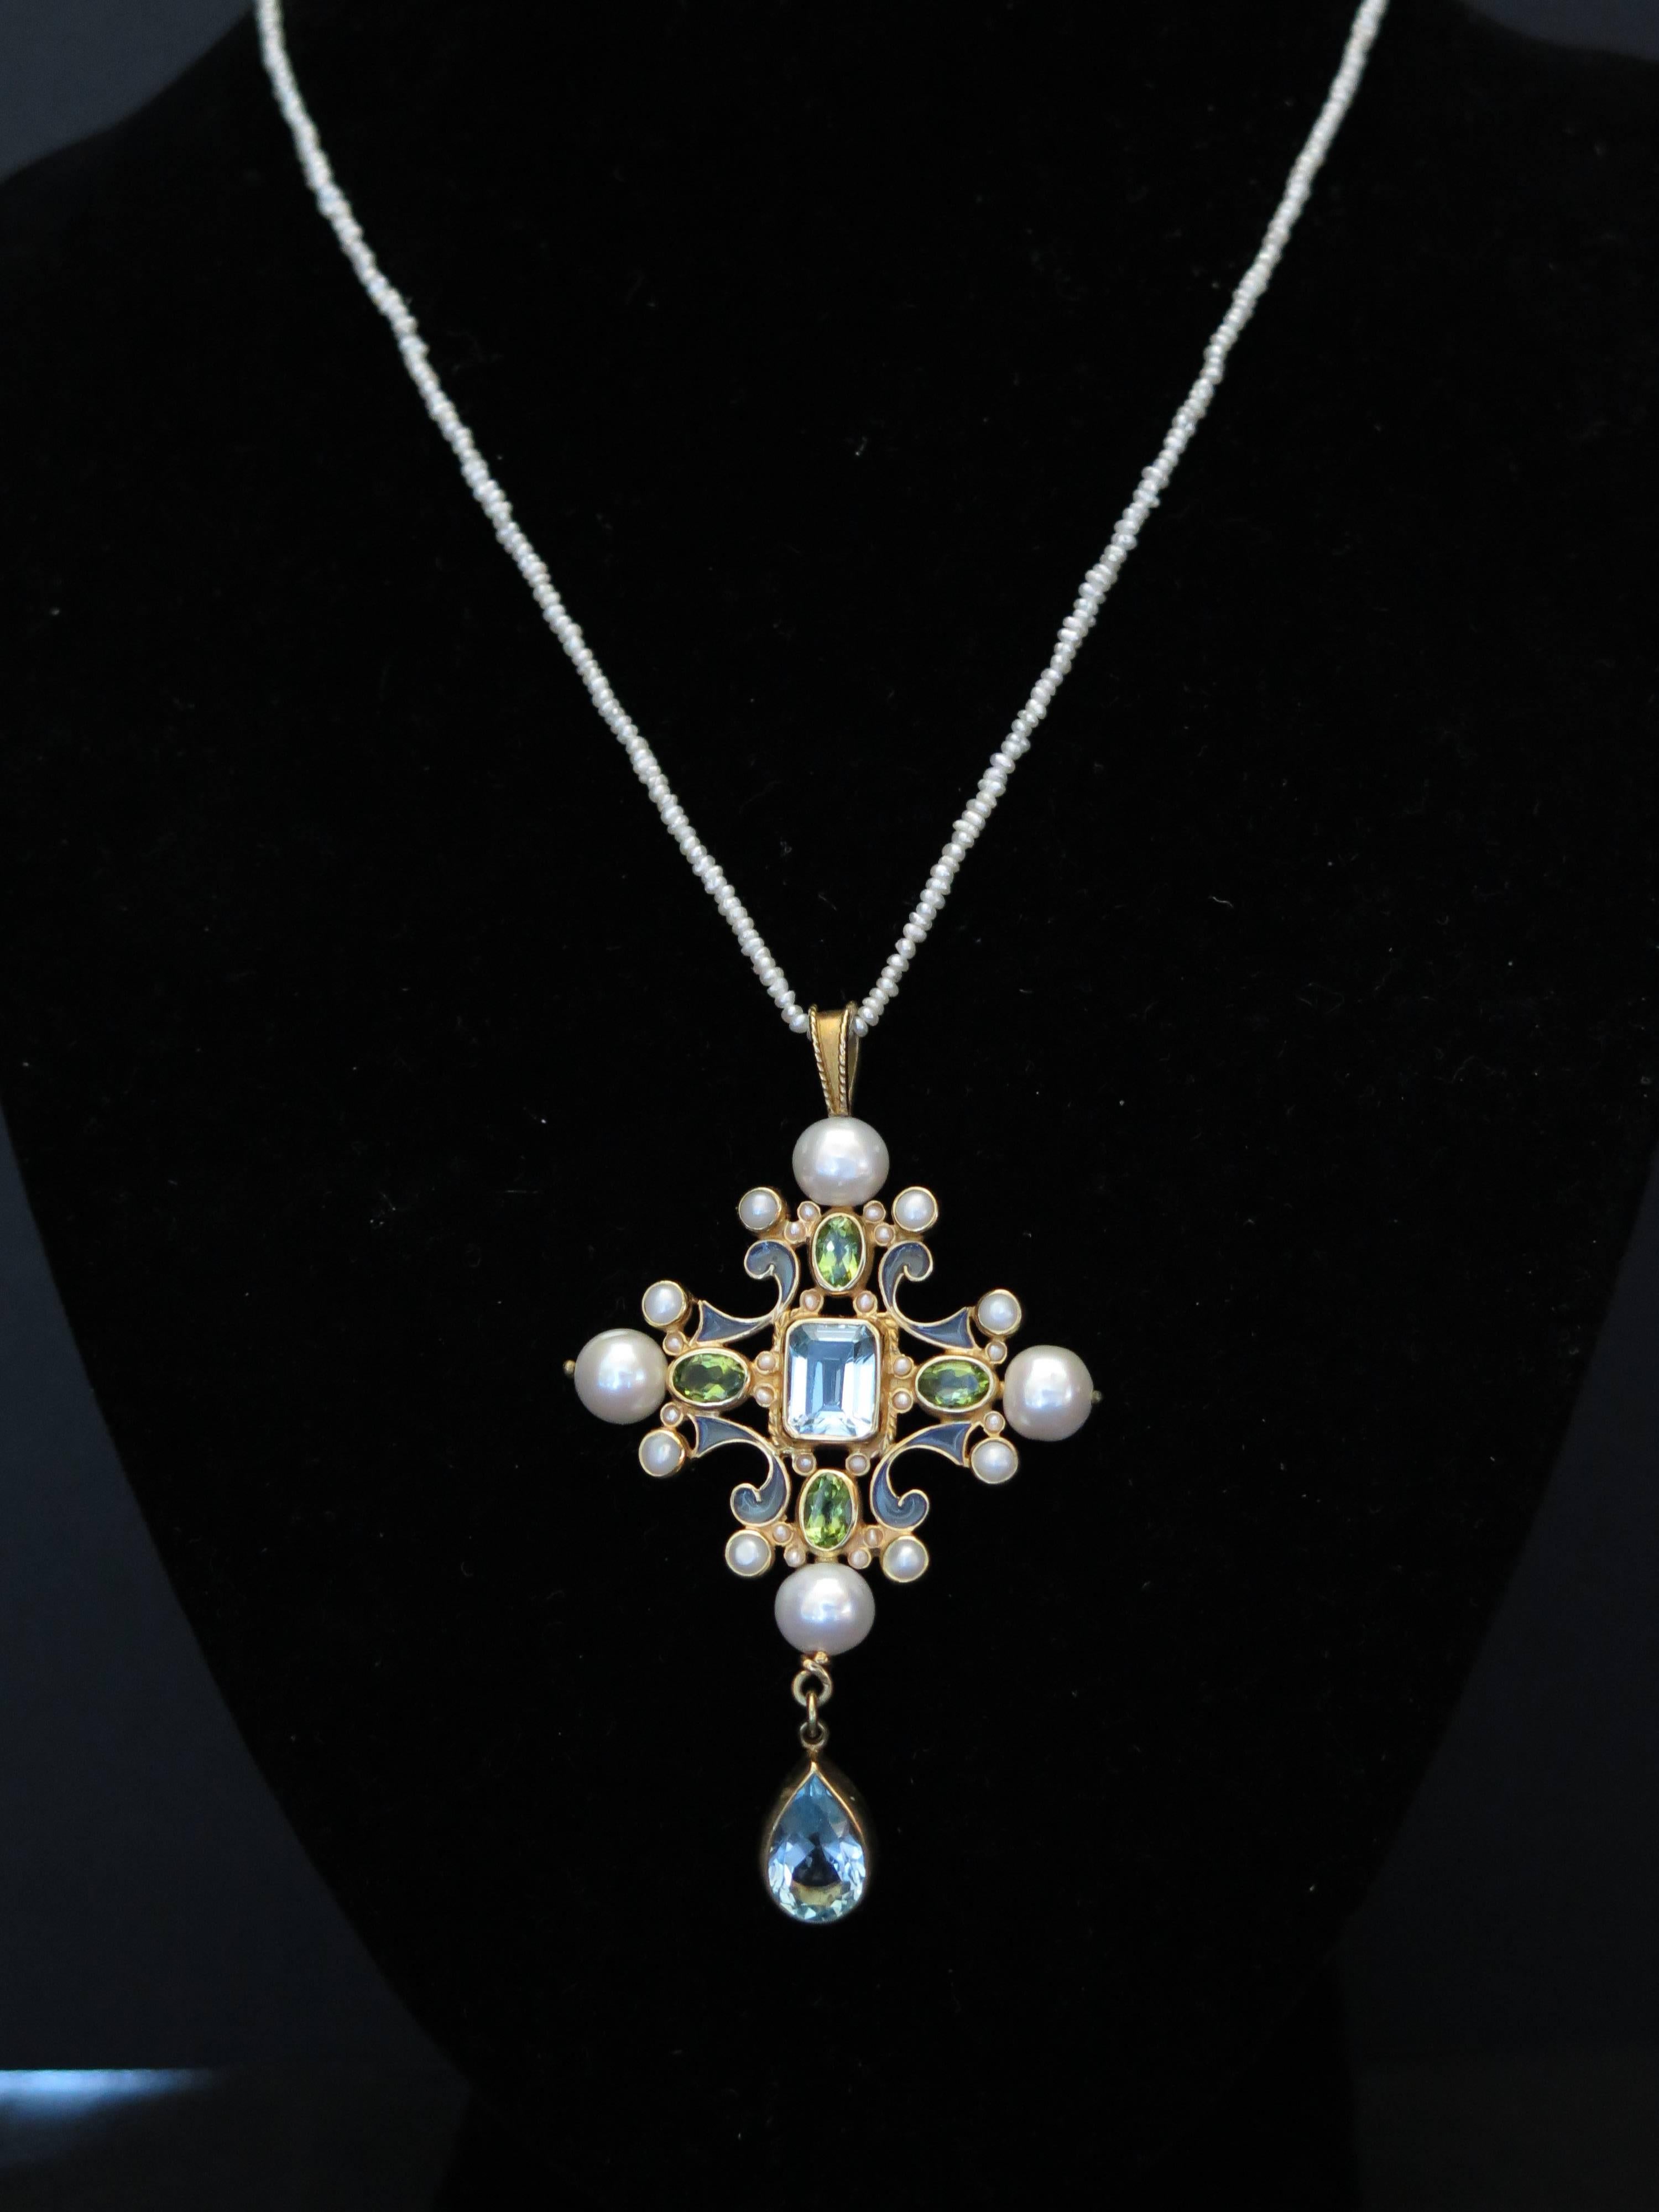 A beautiful aquamarine, peridot and pearl pendant on seed pearls chain  necklace by Percossi Papi. Gold on silver. Marked.